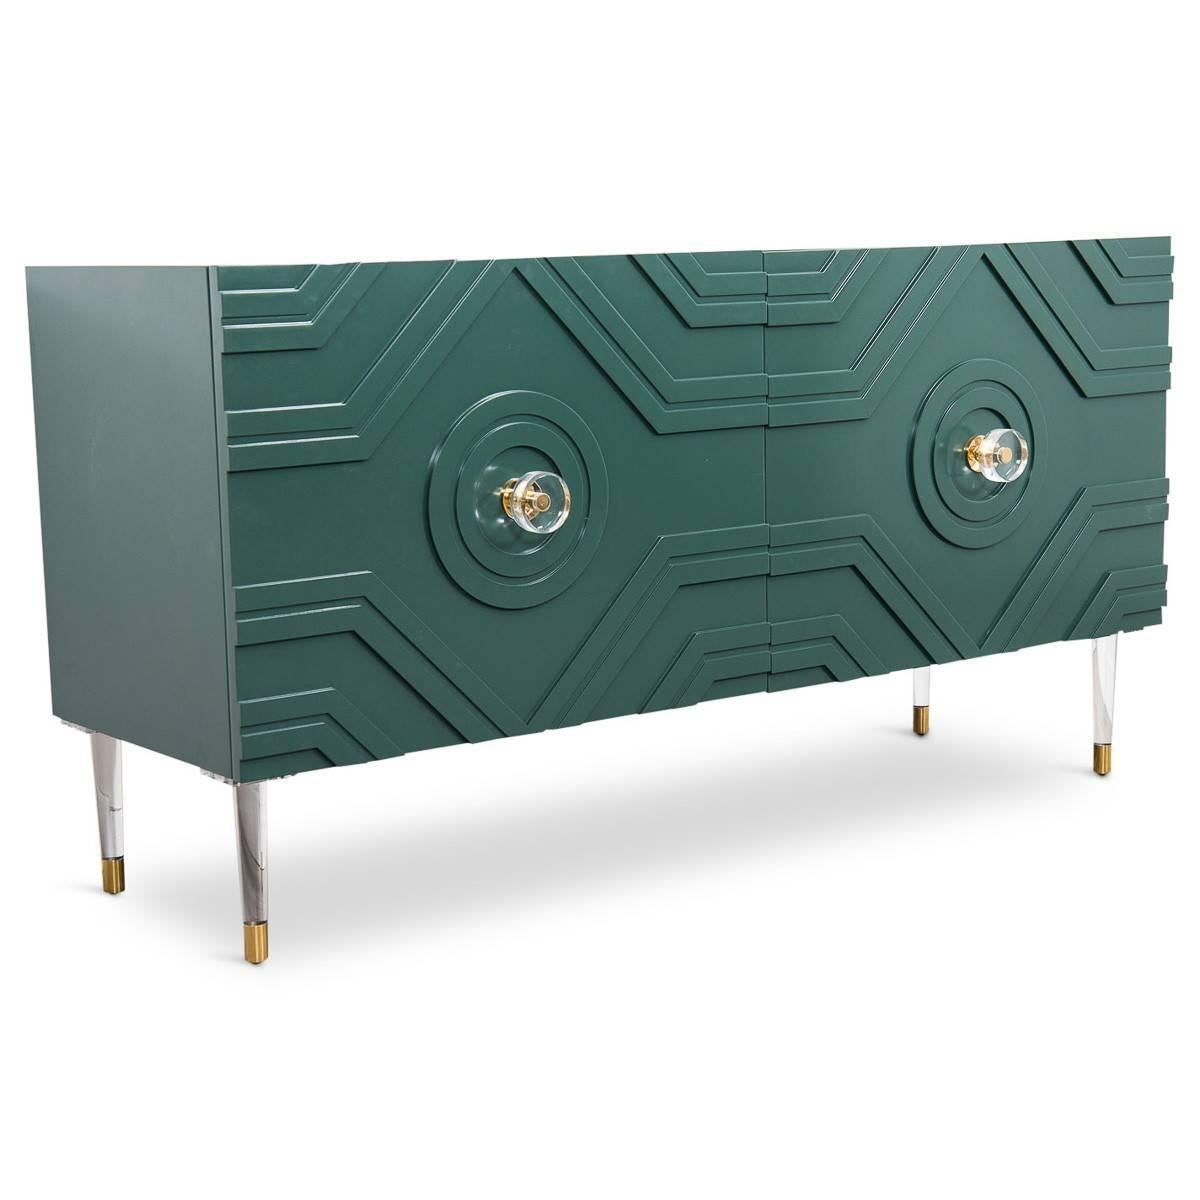 Enhance the decor of your living room, dining room or entryway with this Naples 2 Door Credenza. This piece instantly draws attention thanks to its bold geometric design on front door panels. Inspired by Italy, your eyes are drawn to pyramid-shaped